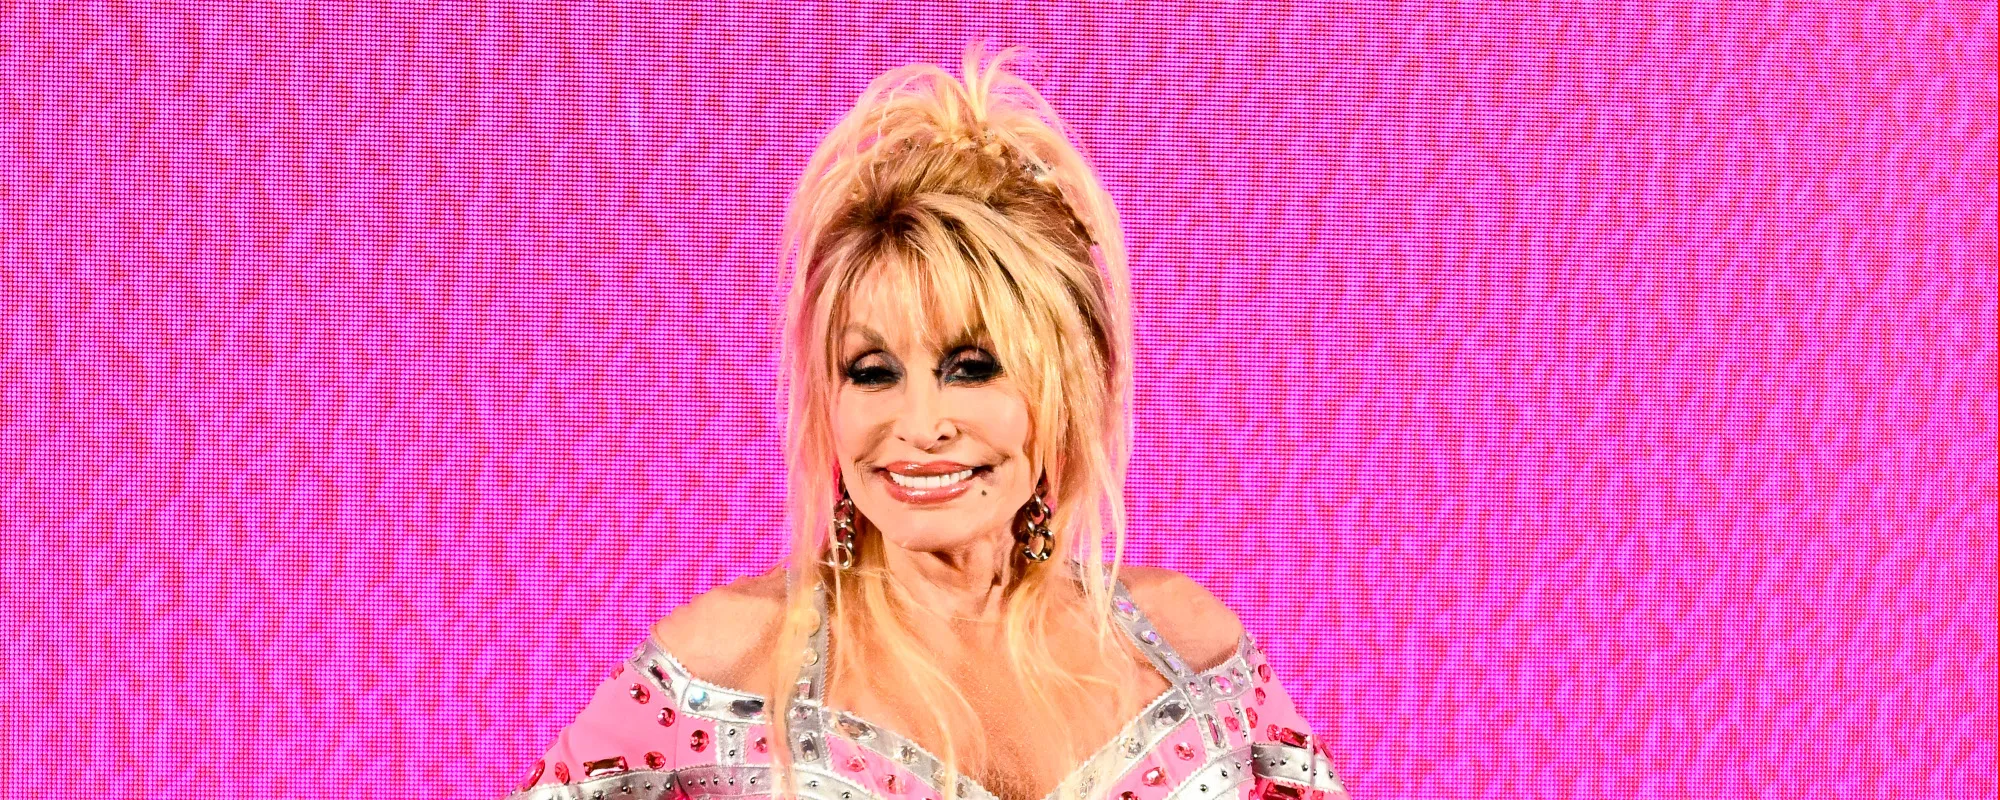 Dolly Parton Recalls the First Time She Heard Miley Cyrus’ ‘Wrecking Ball’—“I Almost Wept in My Car”